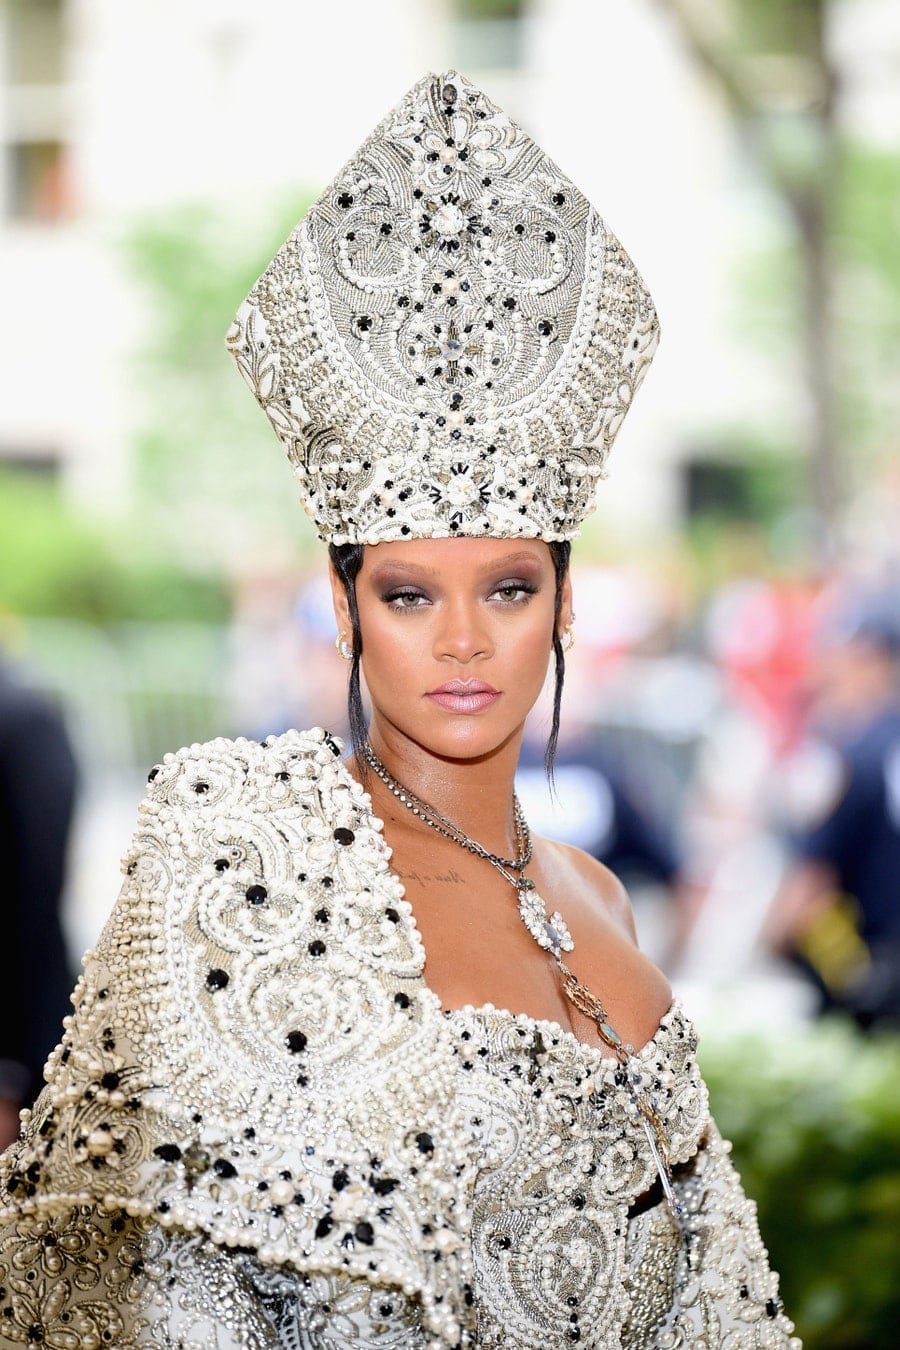 The 16 best Met Gala hair accessories of all time, from subtle to OTT